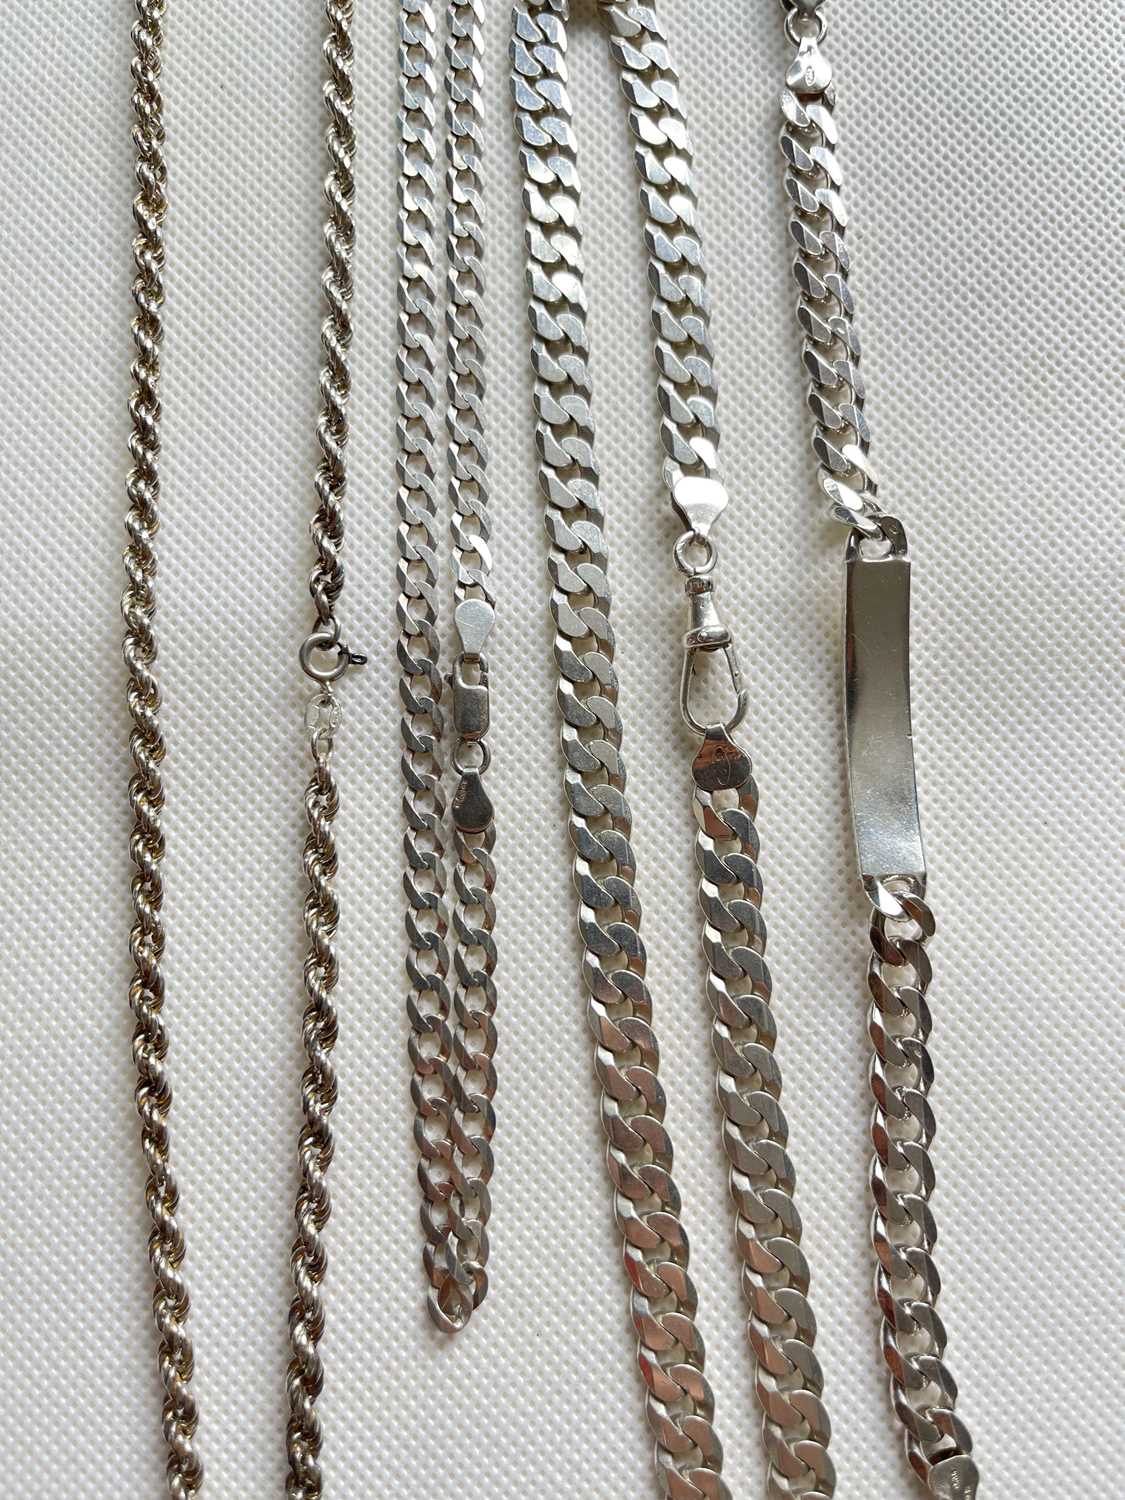 Mixed Lot Of Chains And A Curb Chain ID Bracelet ( 85 grams ) - Image 3 of 3